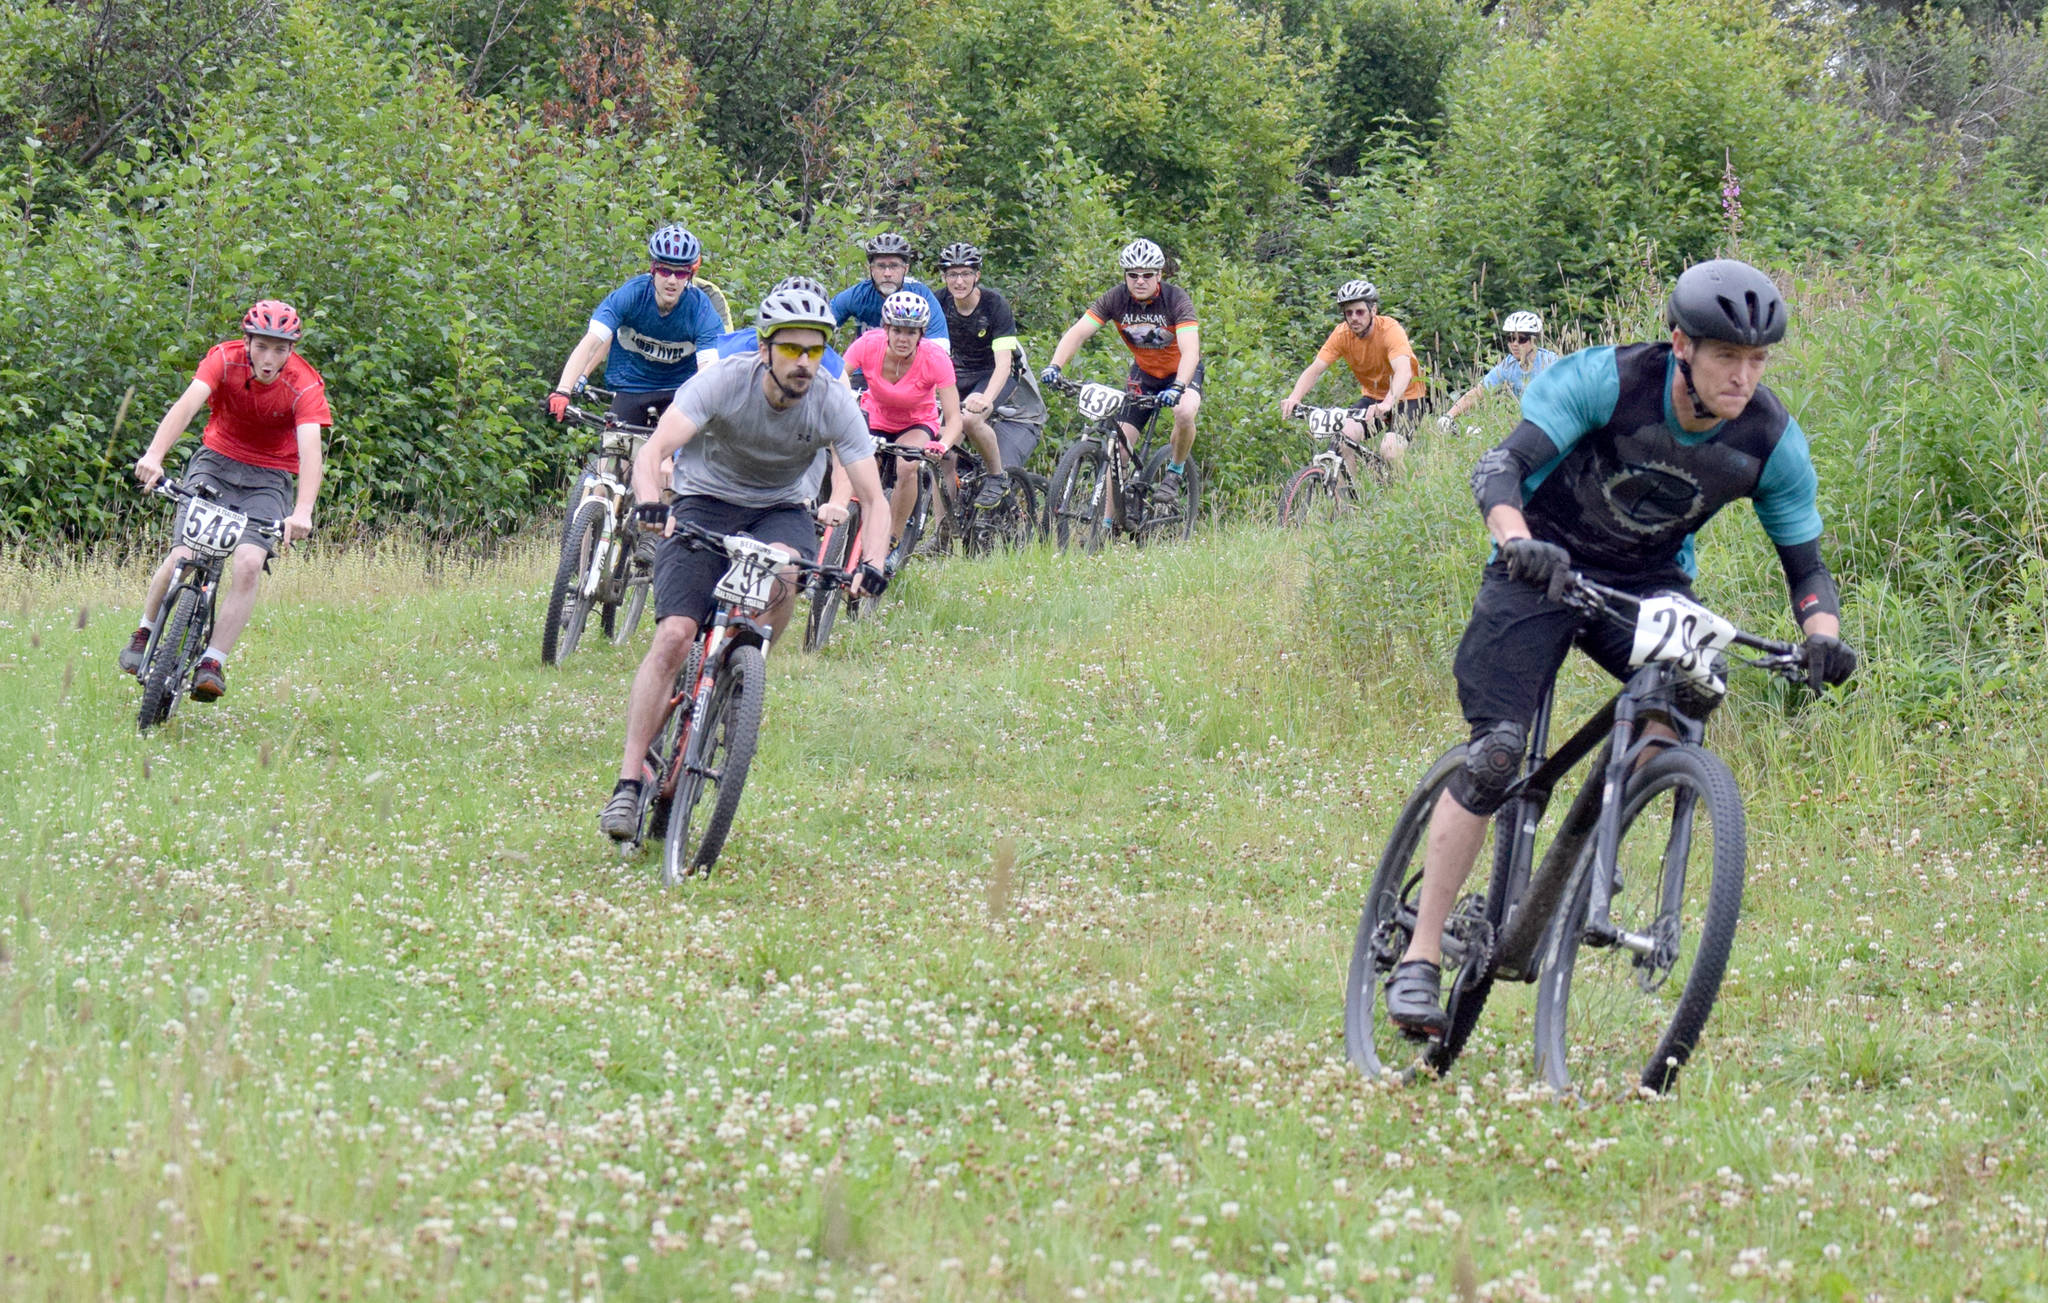 Mike Crawford leads the pack off the start of Soldotna Cycle Series Race 6 on Thursday, Aug. 3, 2017, at Tsalteshi Trails. (Photo by Jeff Helminiak/Peninsula Clarion)